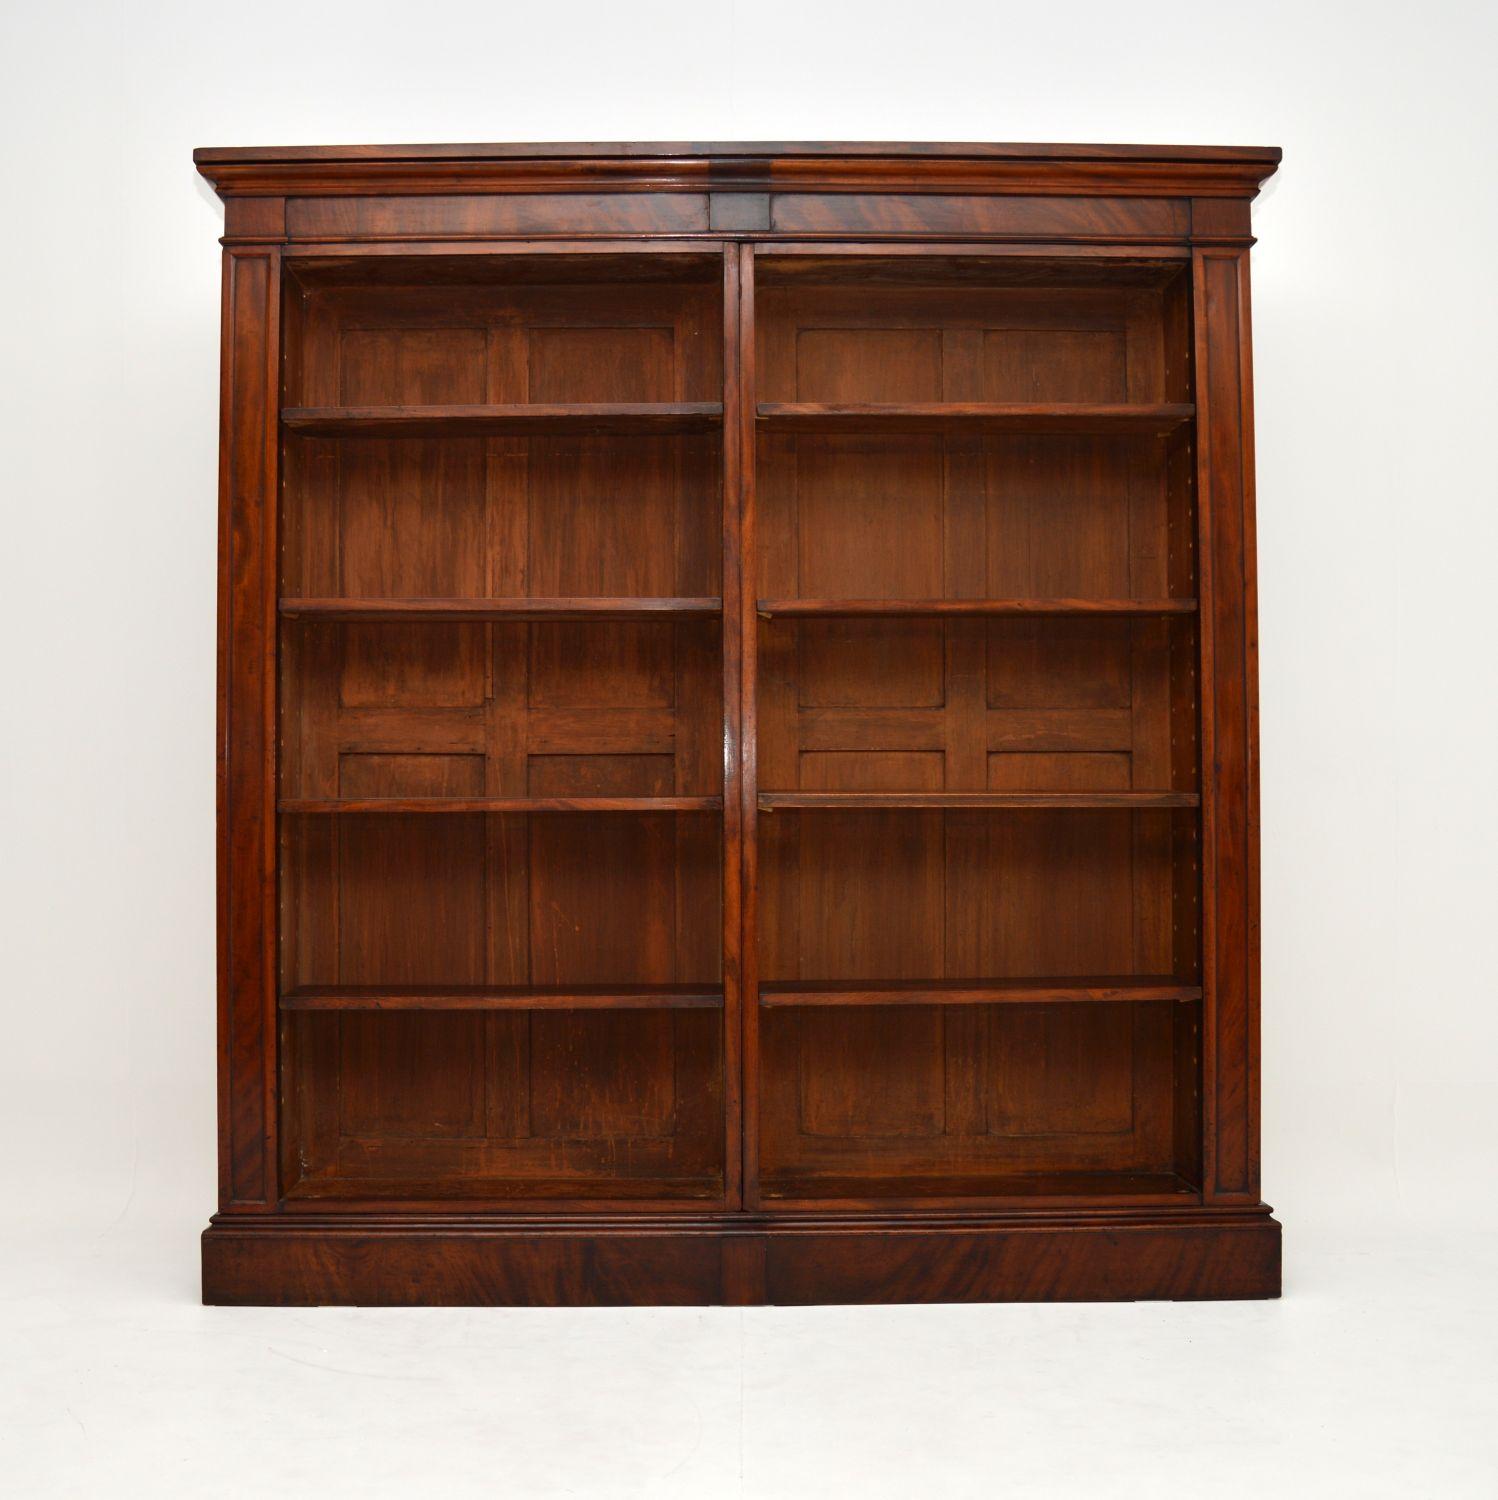 An excellent original antique William IV open bookcase in mahogany, dating from around the 1830-40’s period.

It is a great size with lots of storage space, and doesn’t stick out too far depth wise. The quality is excellent, this is nicely